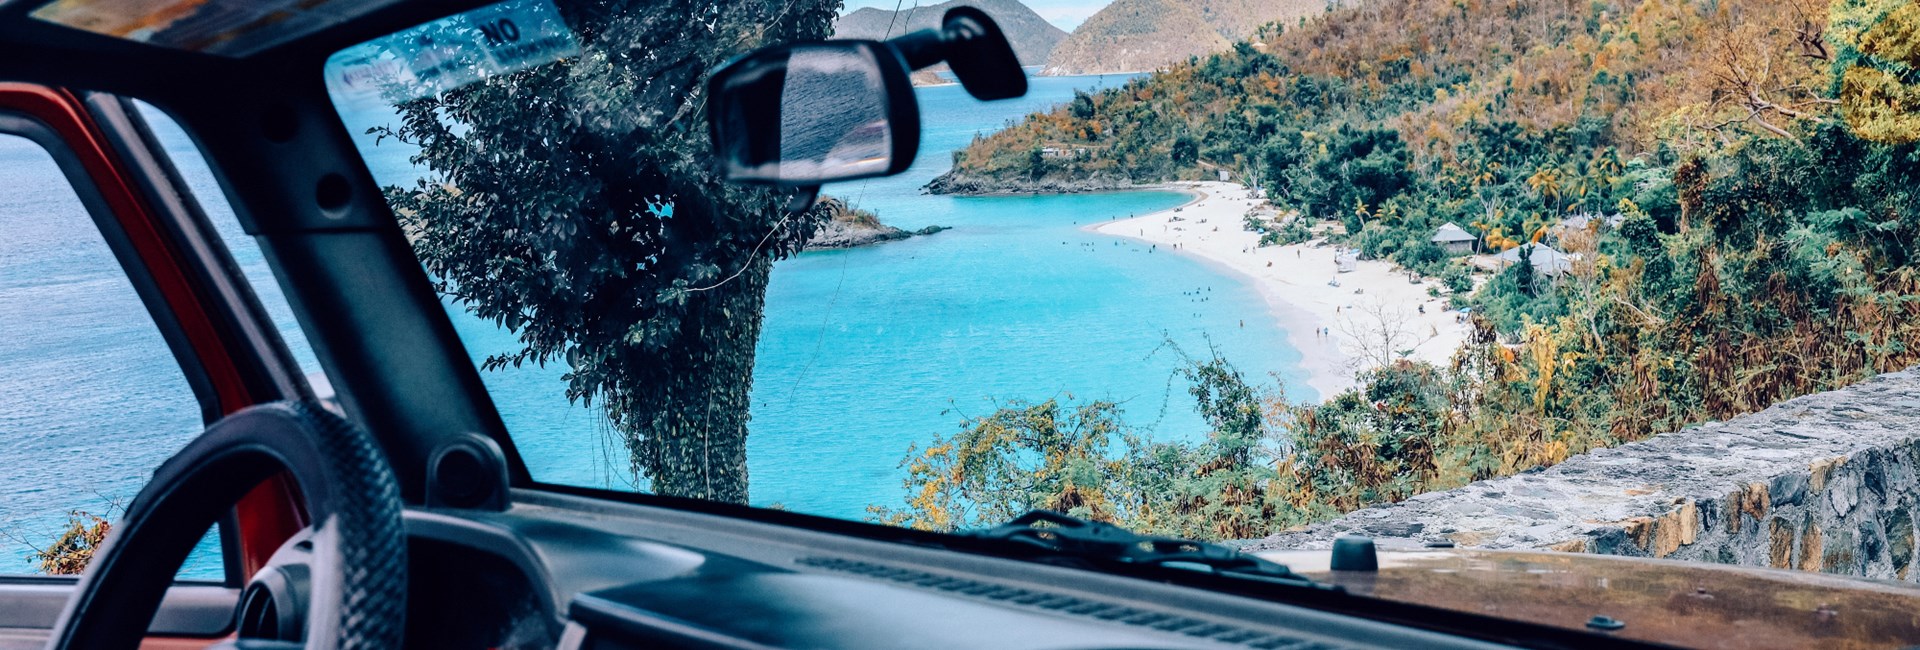 View of sandy beach and leafy mountains through car windscreen - BVI